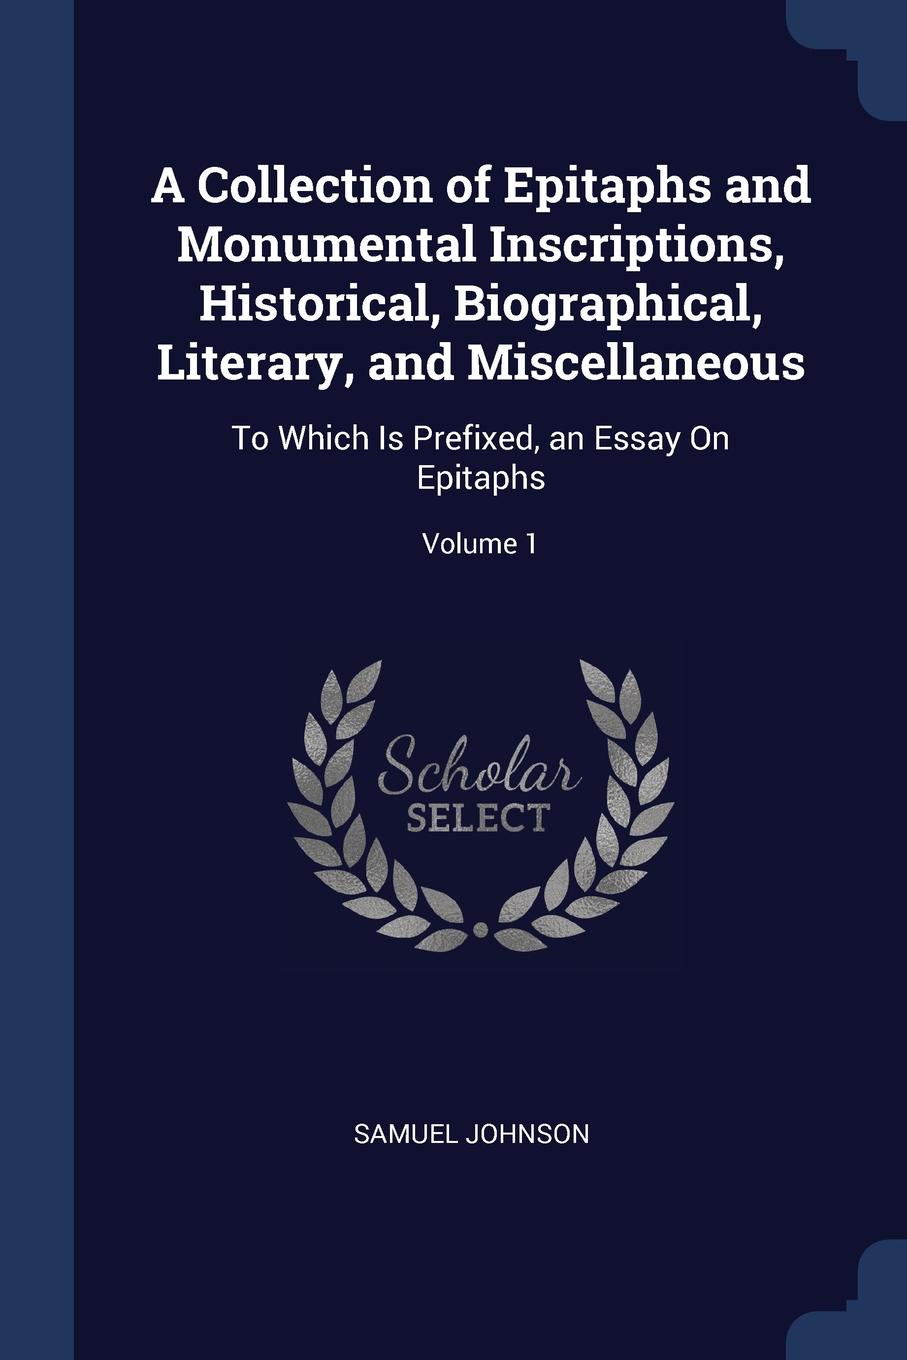 A Collection of Epitaphs and Monumental Inscriptions, Historical, Biographical, Literary, and Miscellaneous. To Which Is Prefixed, an Essay On Epitaphs; Volume 1